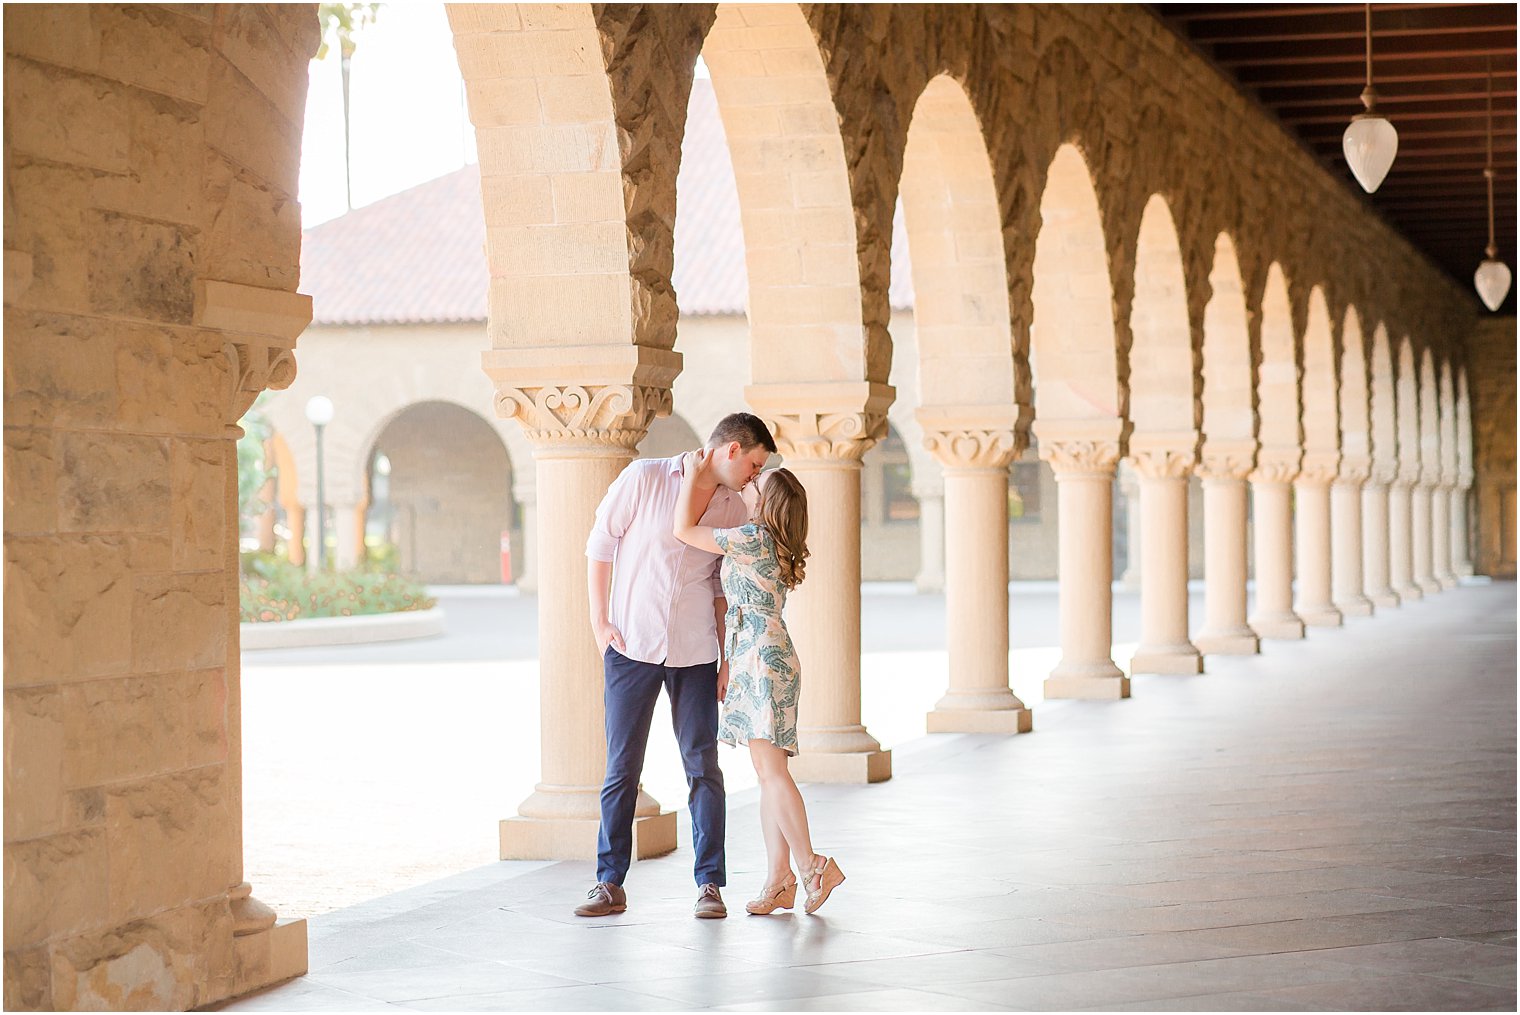 Engagement photos in hallway at Stanford University